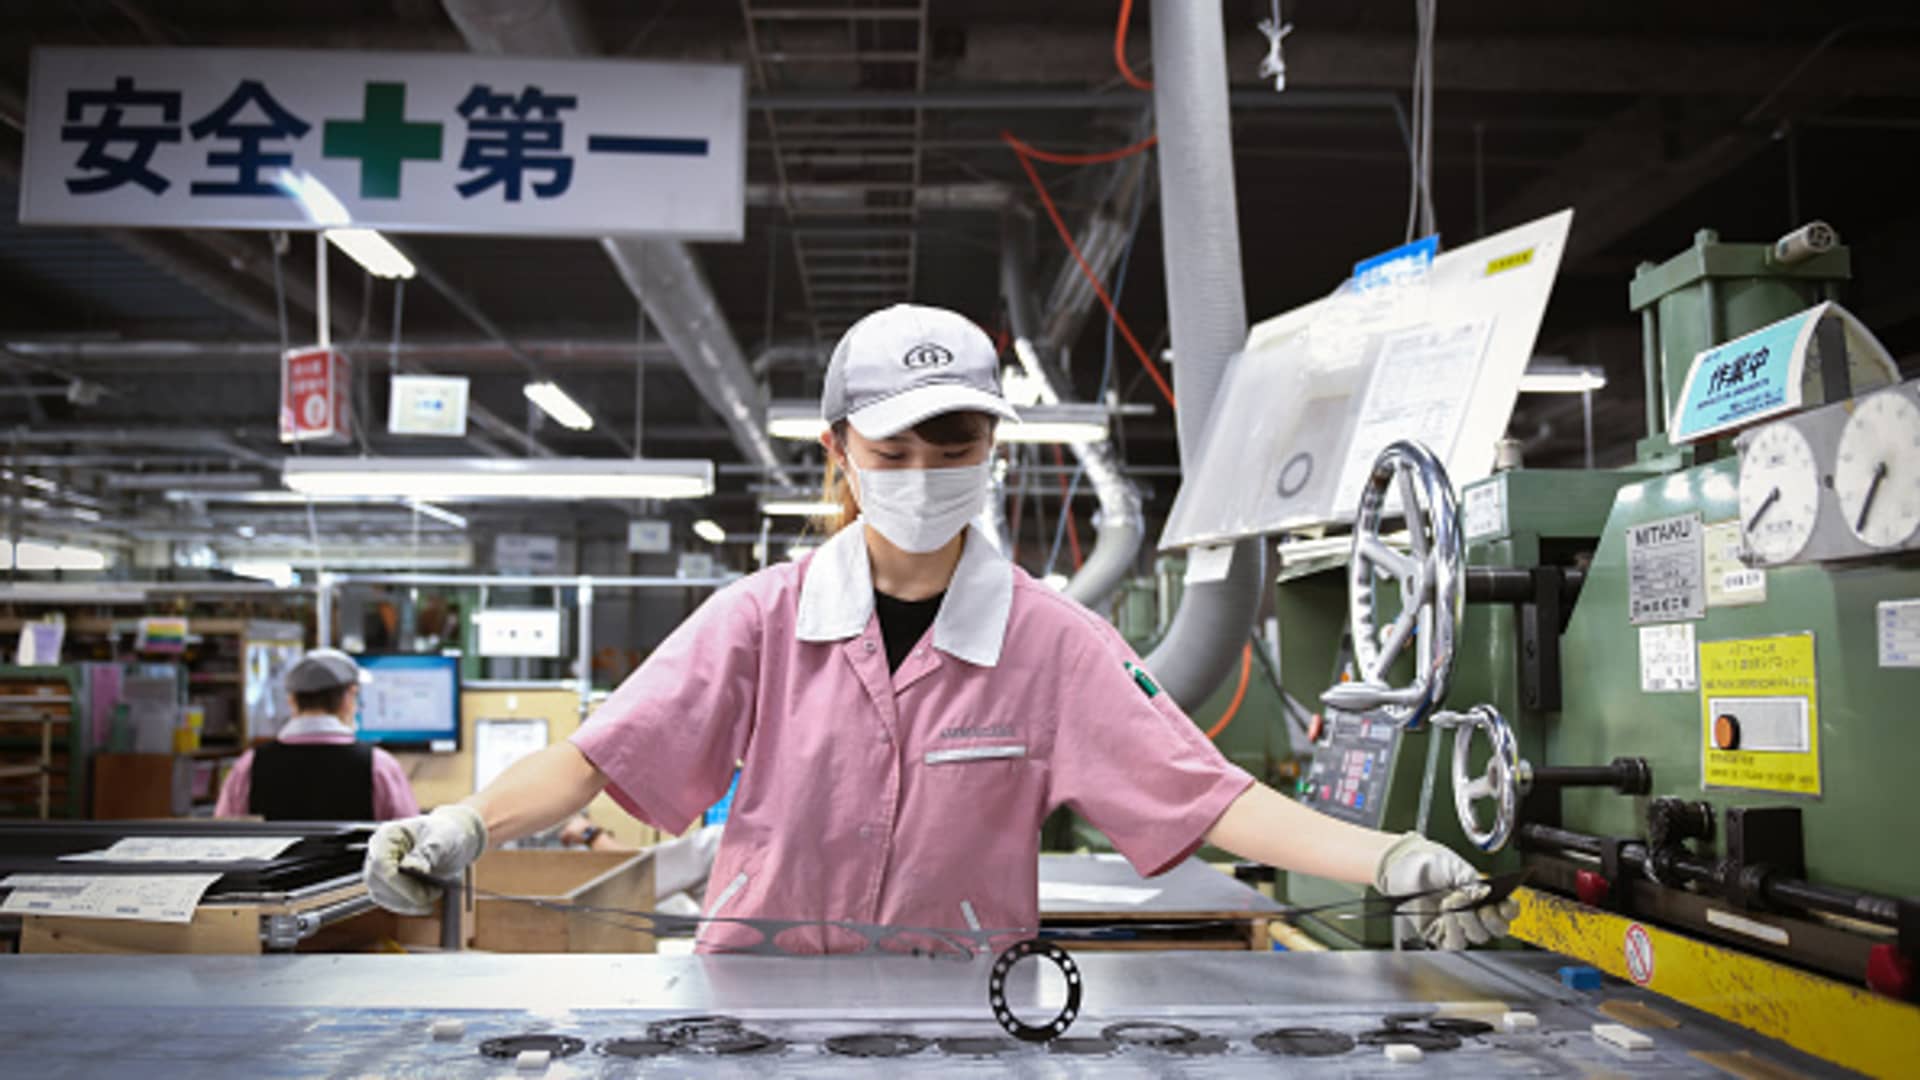 An employee checks gaskets after processing them in an automatic press machine at the Hamamatsu Gasket Co. factory in Hamamatsu, Shizuoka Prefecture, Japan, on Wednesday, Oct. 6, 2021.